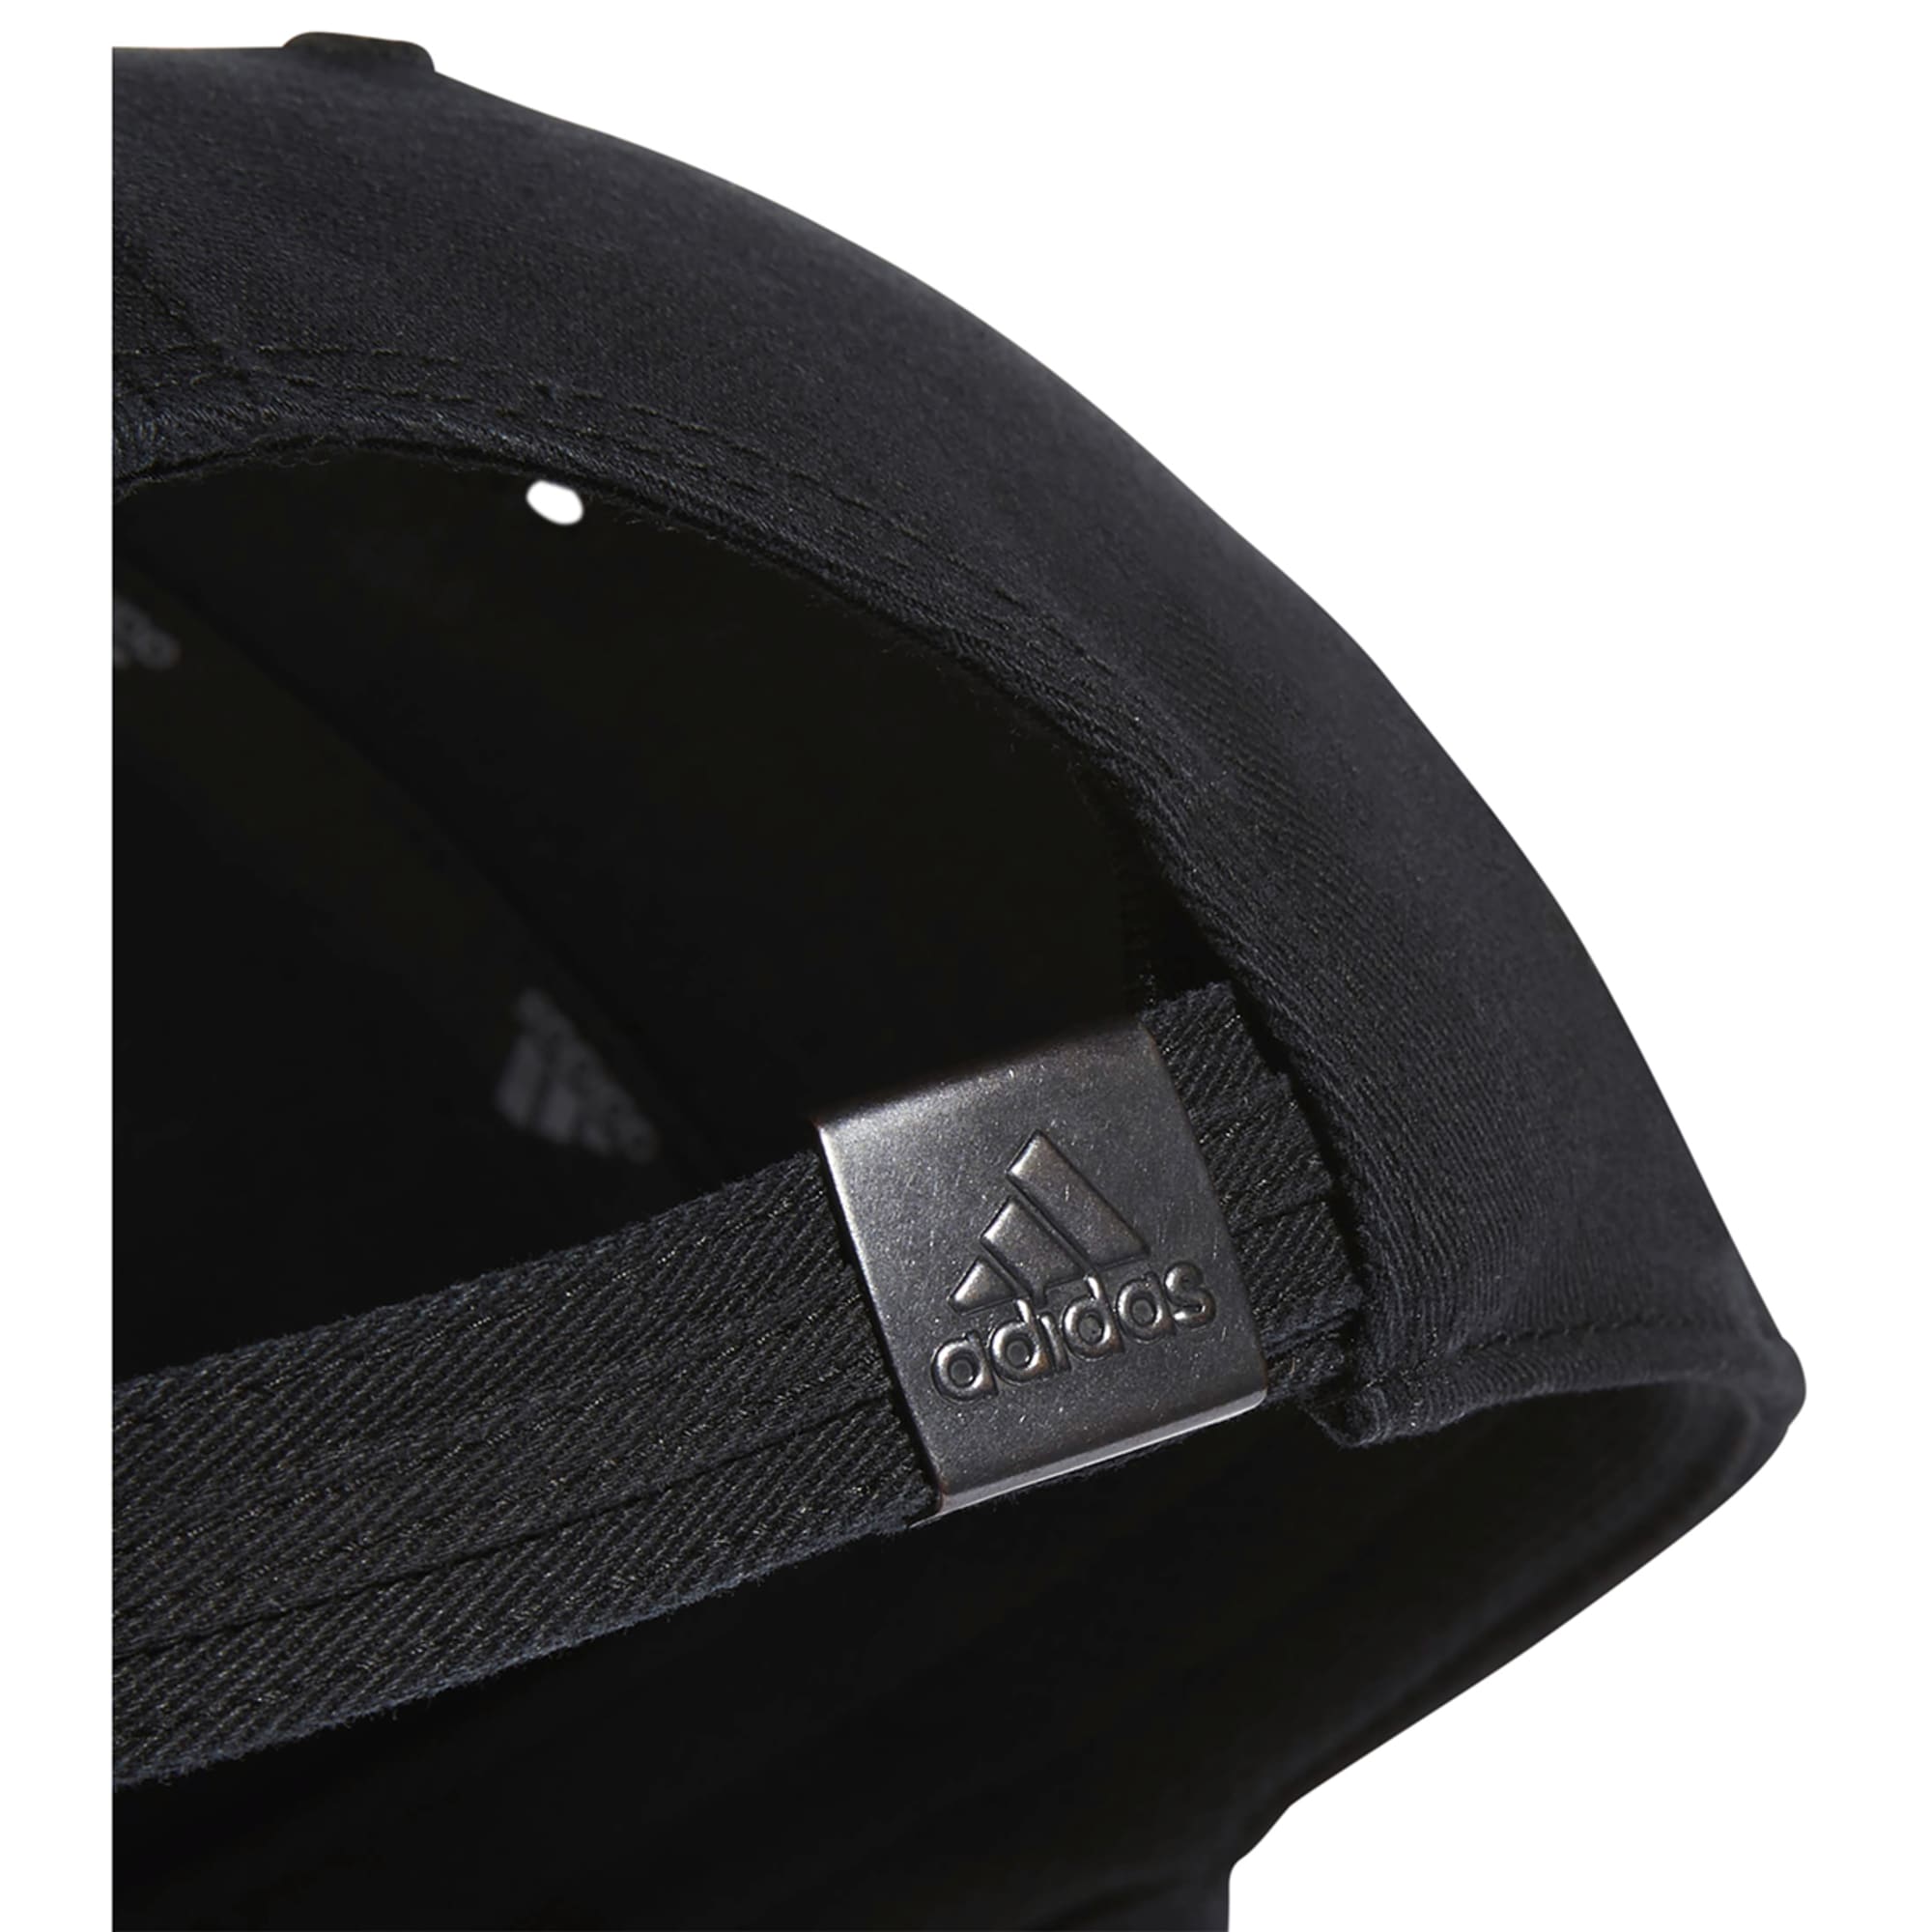 adidas men's ultimate relaxed cap